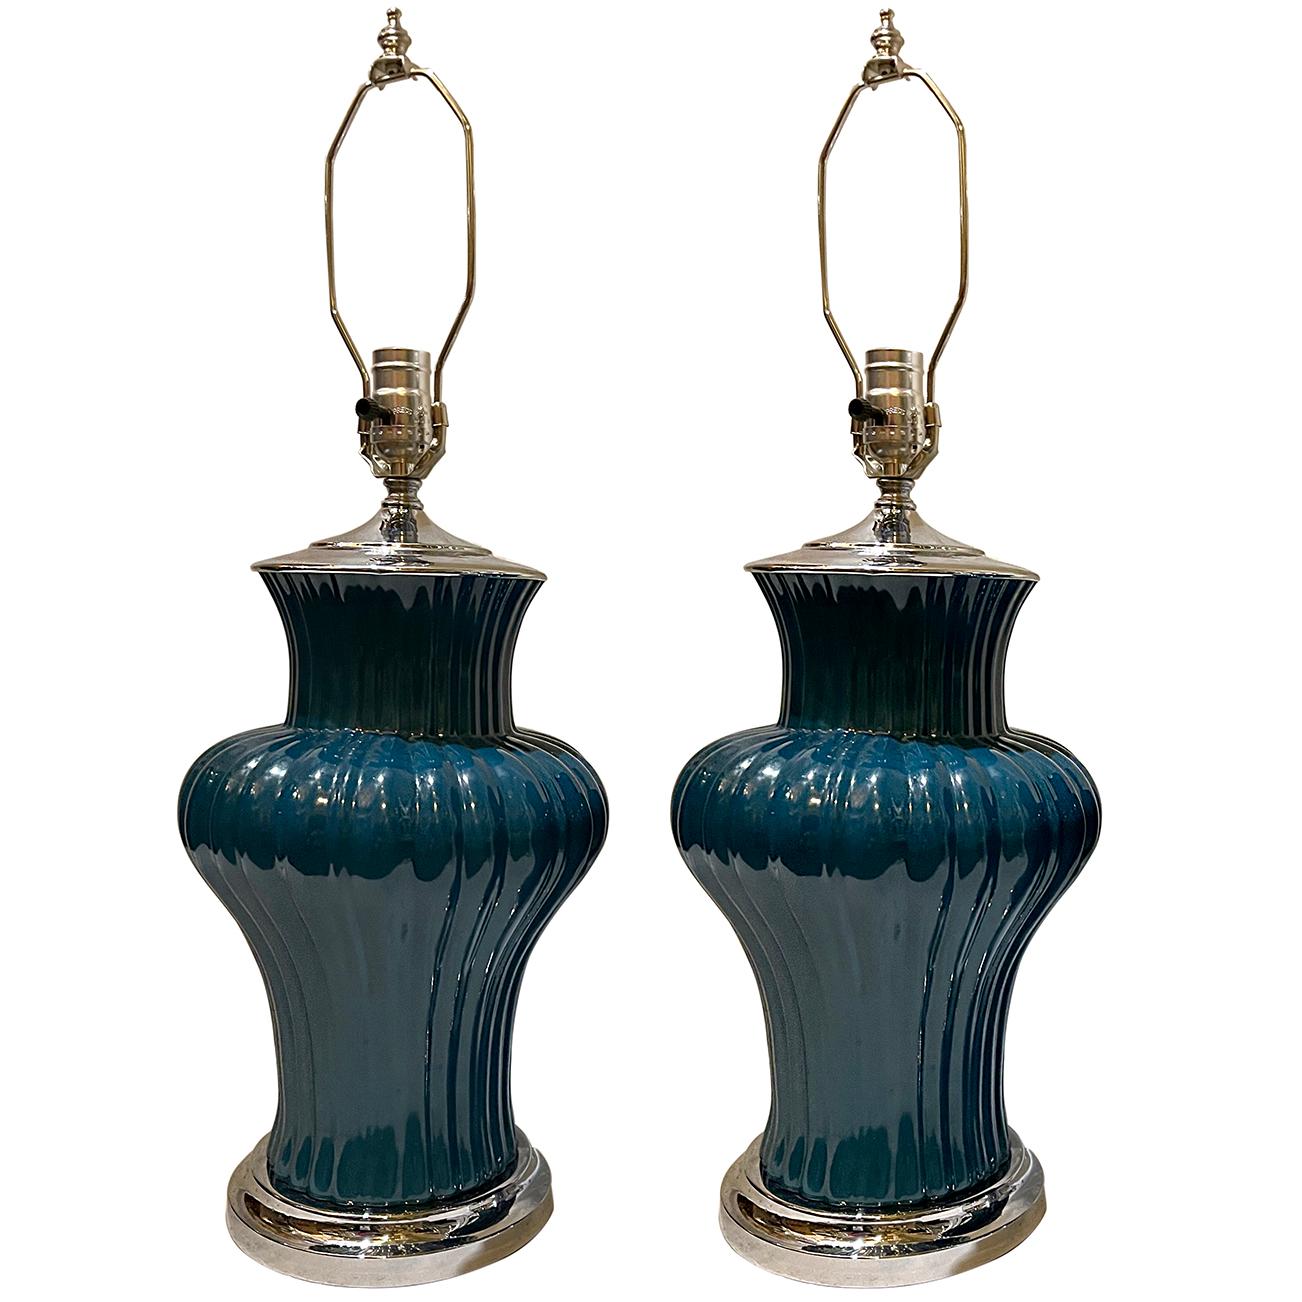 A pair of circa 1950's Italian blue porcelain table lamps with nickel-plated bases.

Measurements:
Height of body: 17